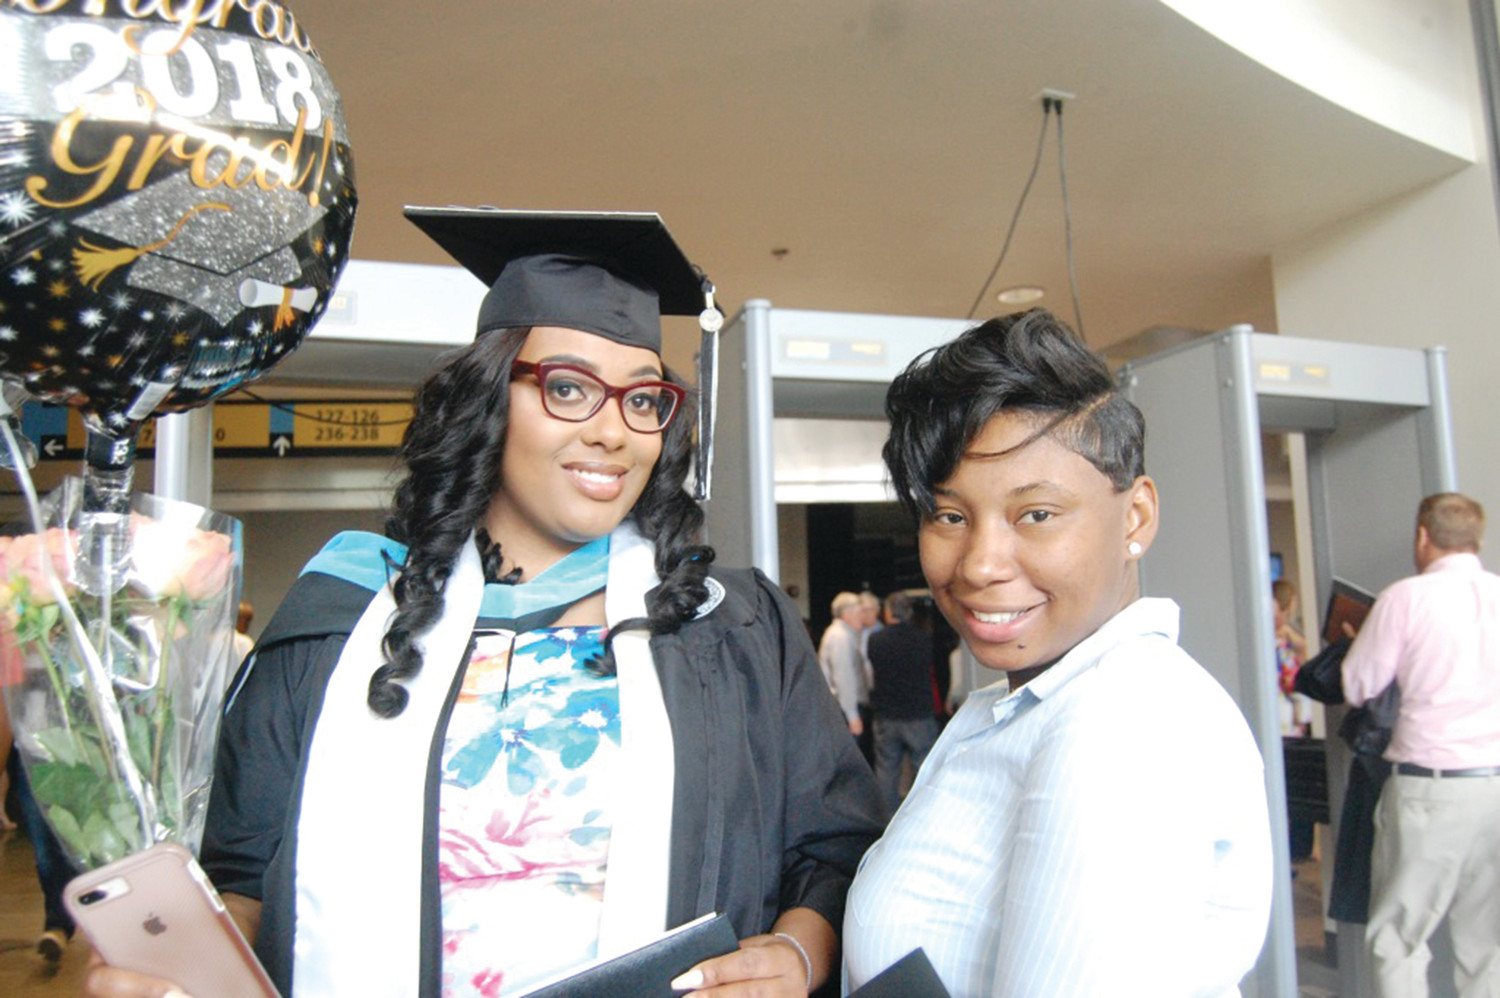 Quameé Andrade, left, who received her Master’s in Education, smiles with her sister Denise Geegbae following her graduation from Providence College.